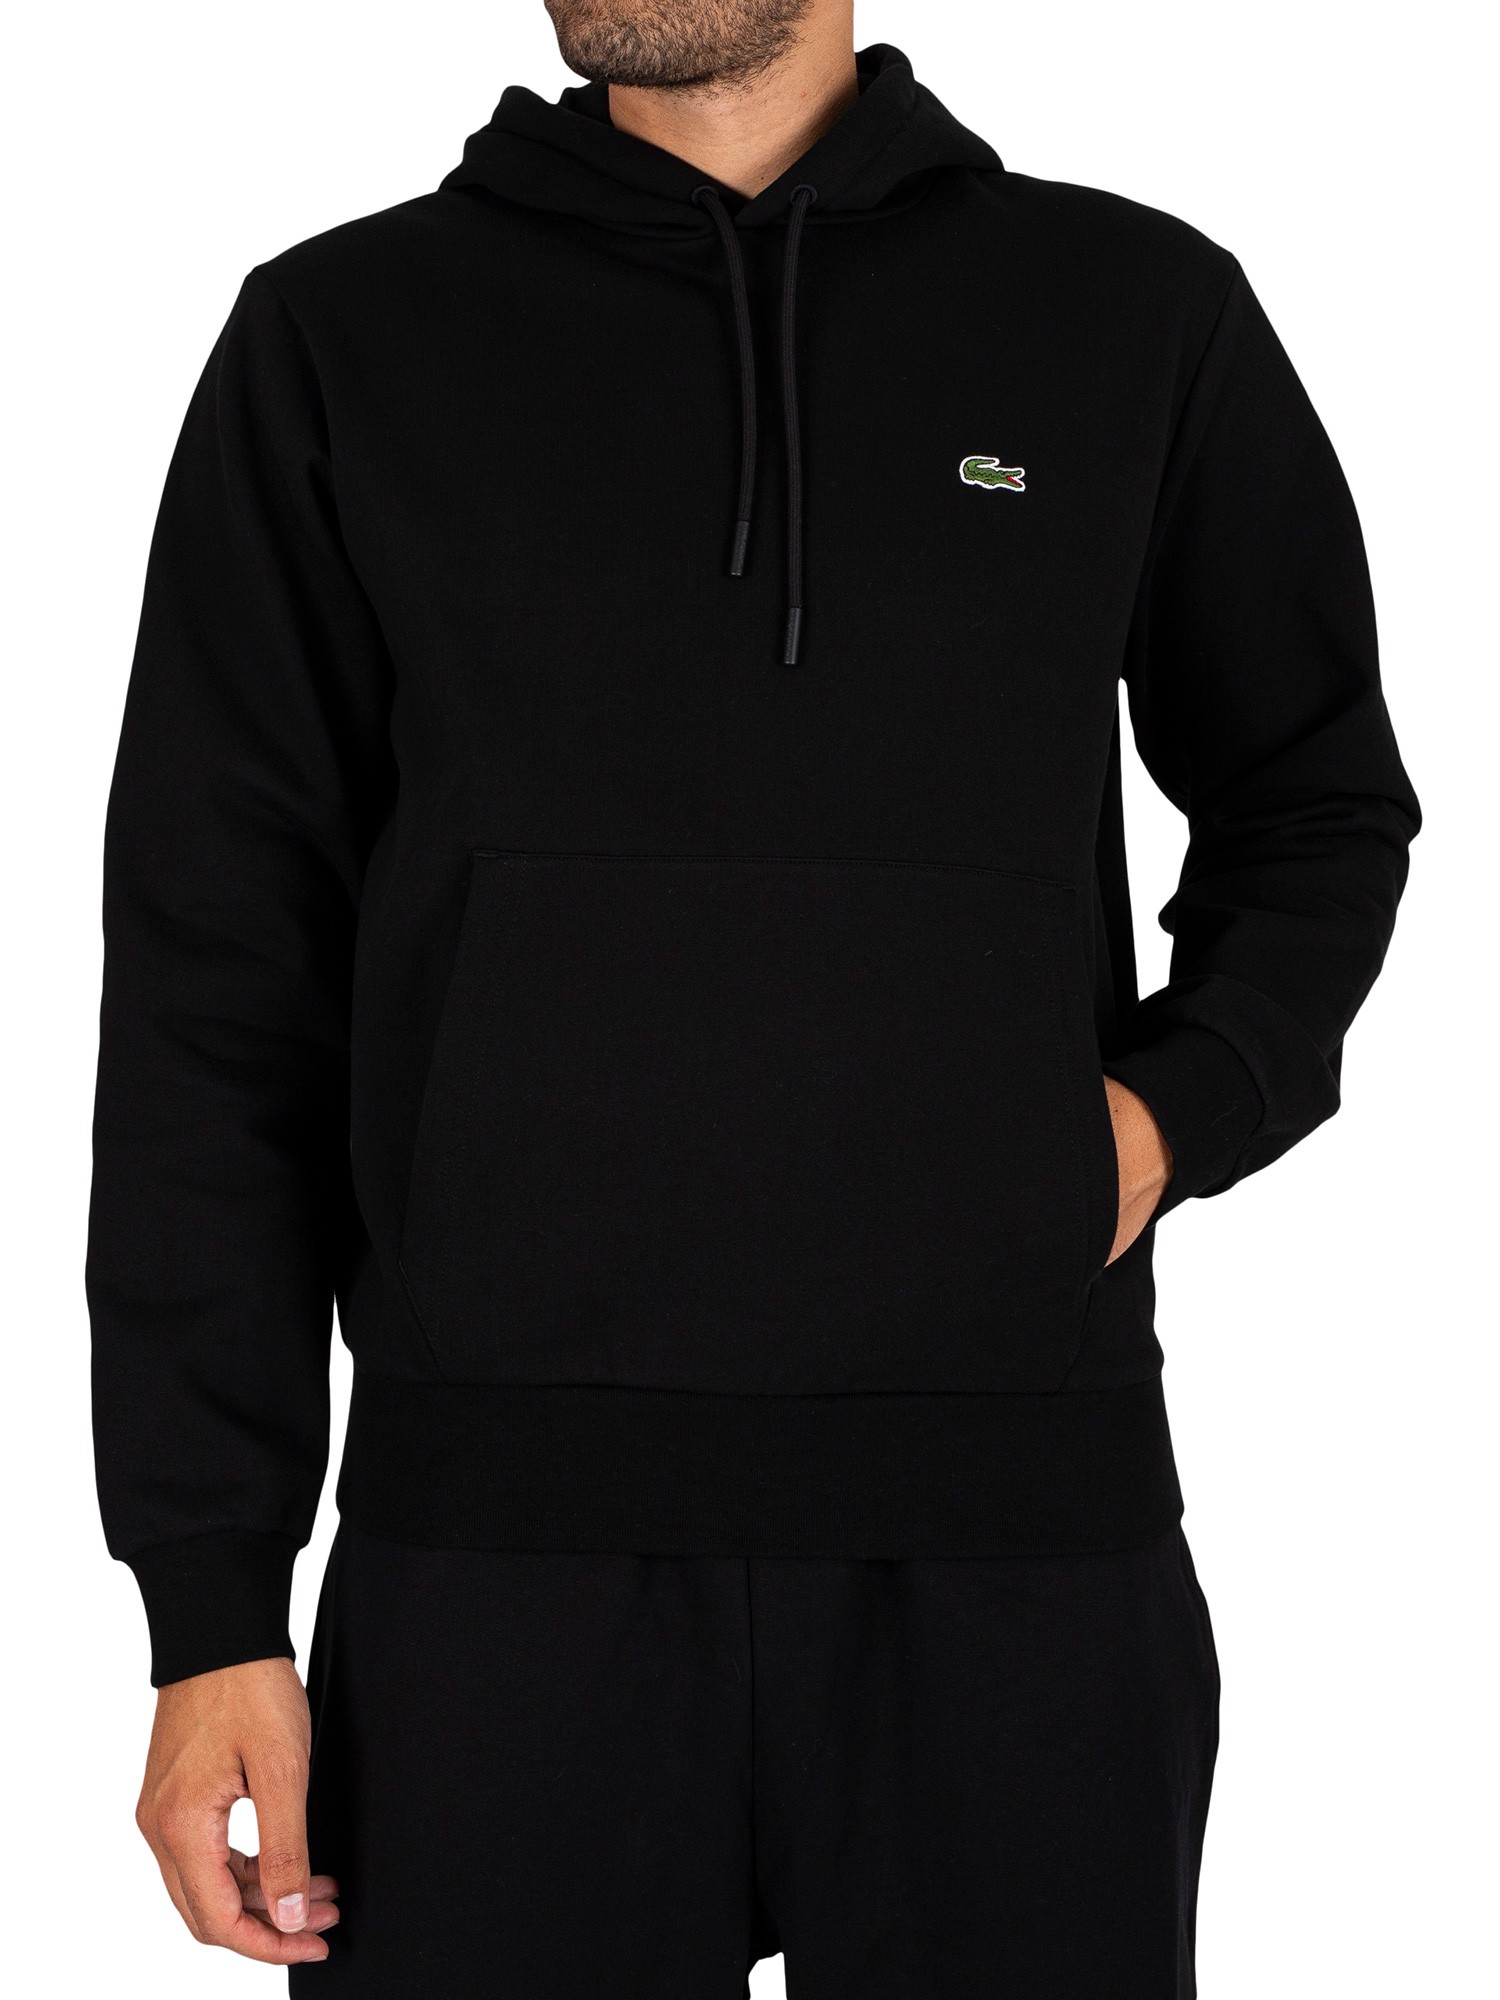 Lacoste Logo Pullover Hoodie - Black | Standout